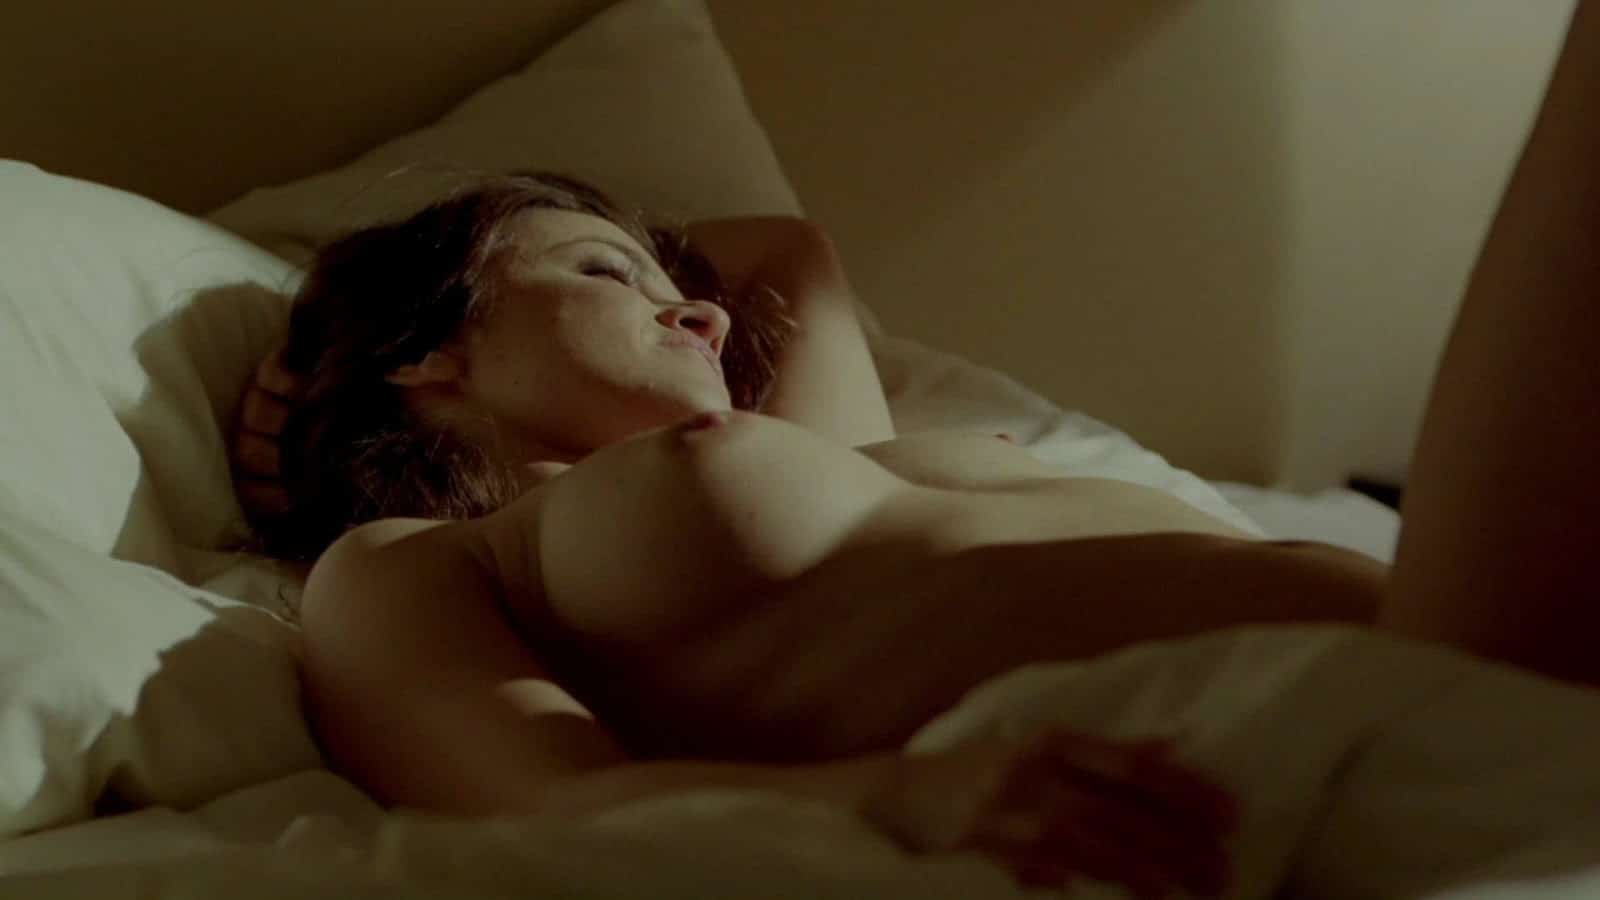 sexy pic of melissa benoist nipple and tit exposed while lying in bed